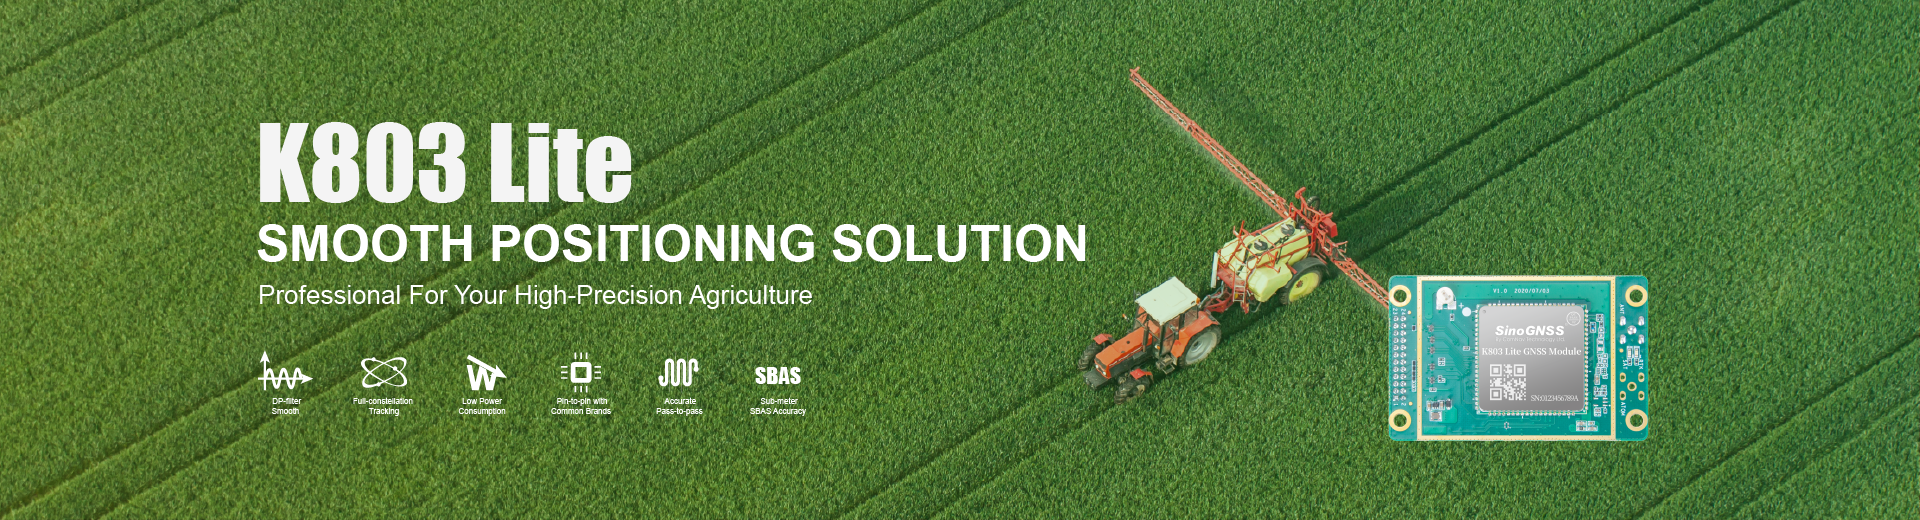 K803 Lite Smooth Positioning Solution for Precision Agriculture